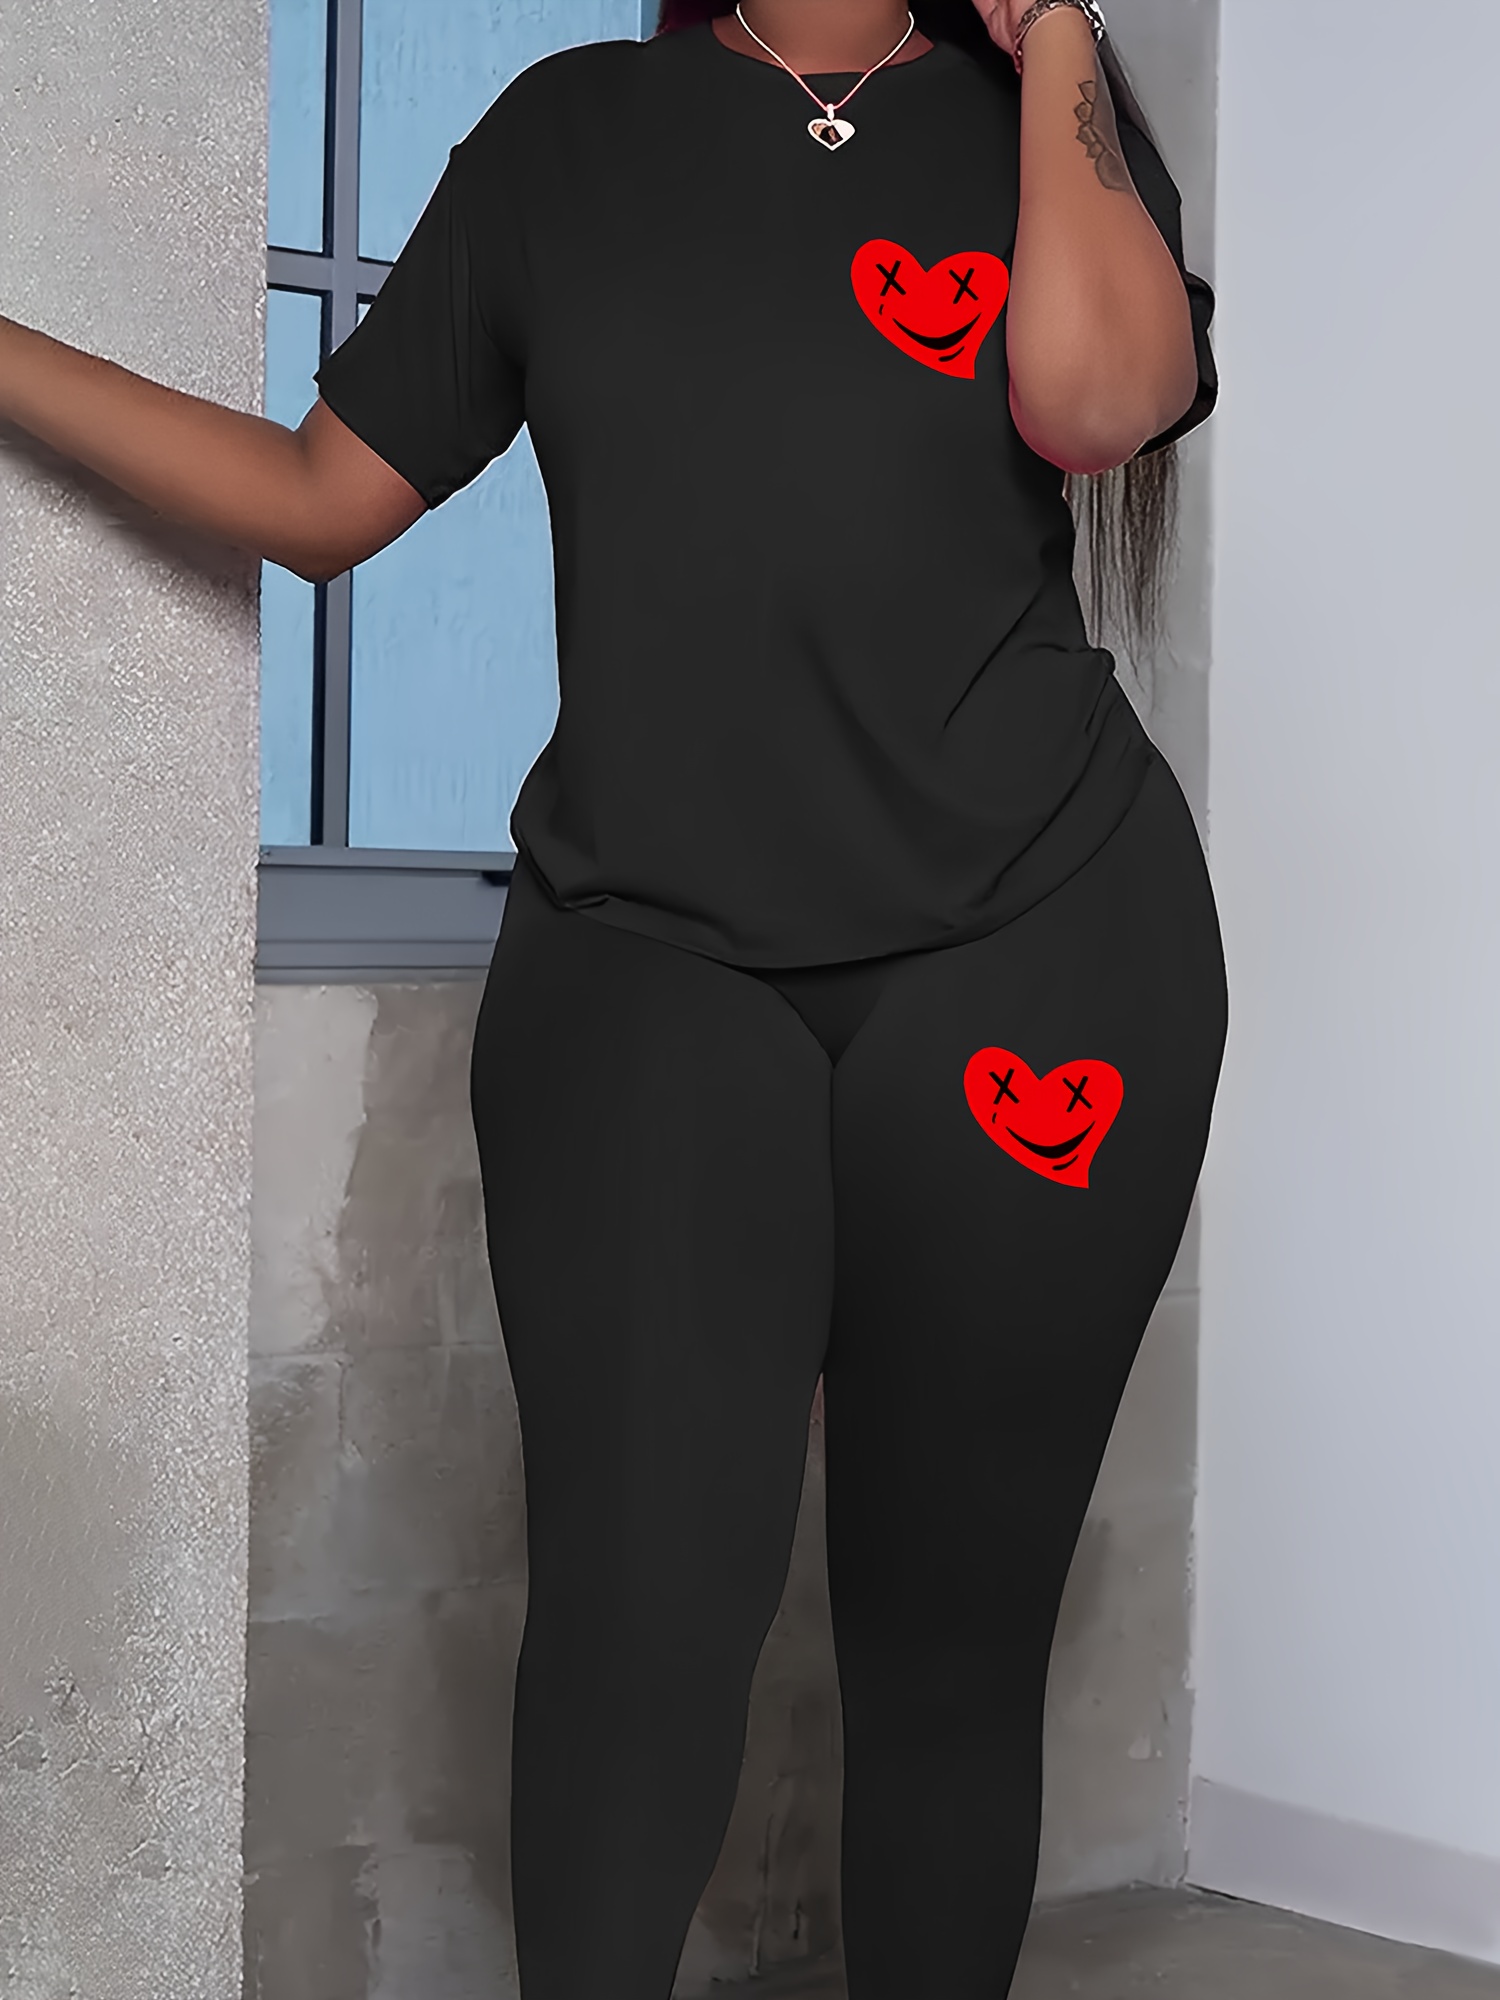 Leggings review for my curvy and plus size gals ❤️❤️ Outfit